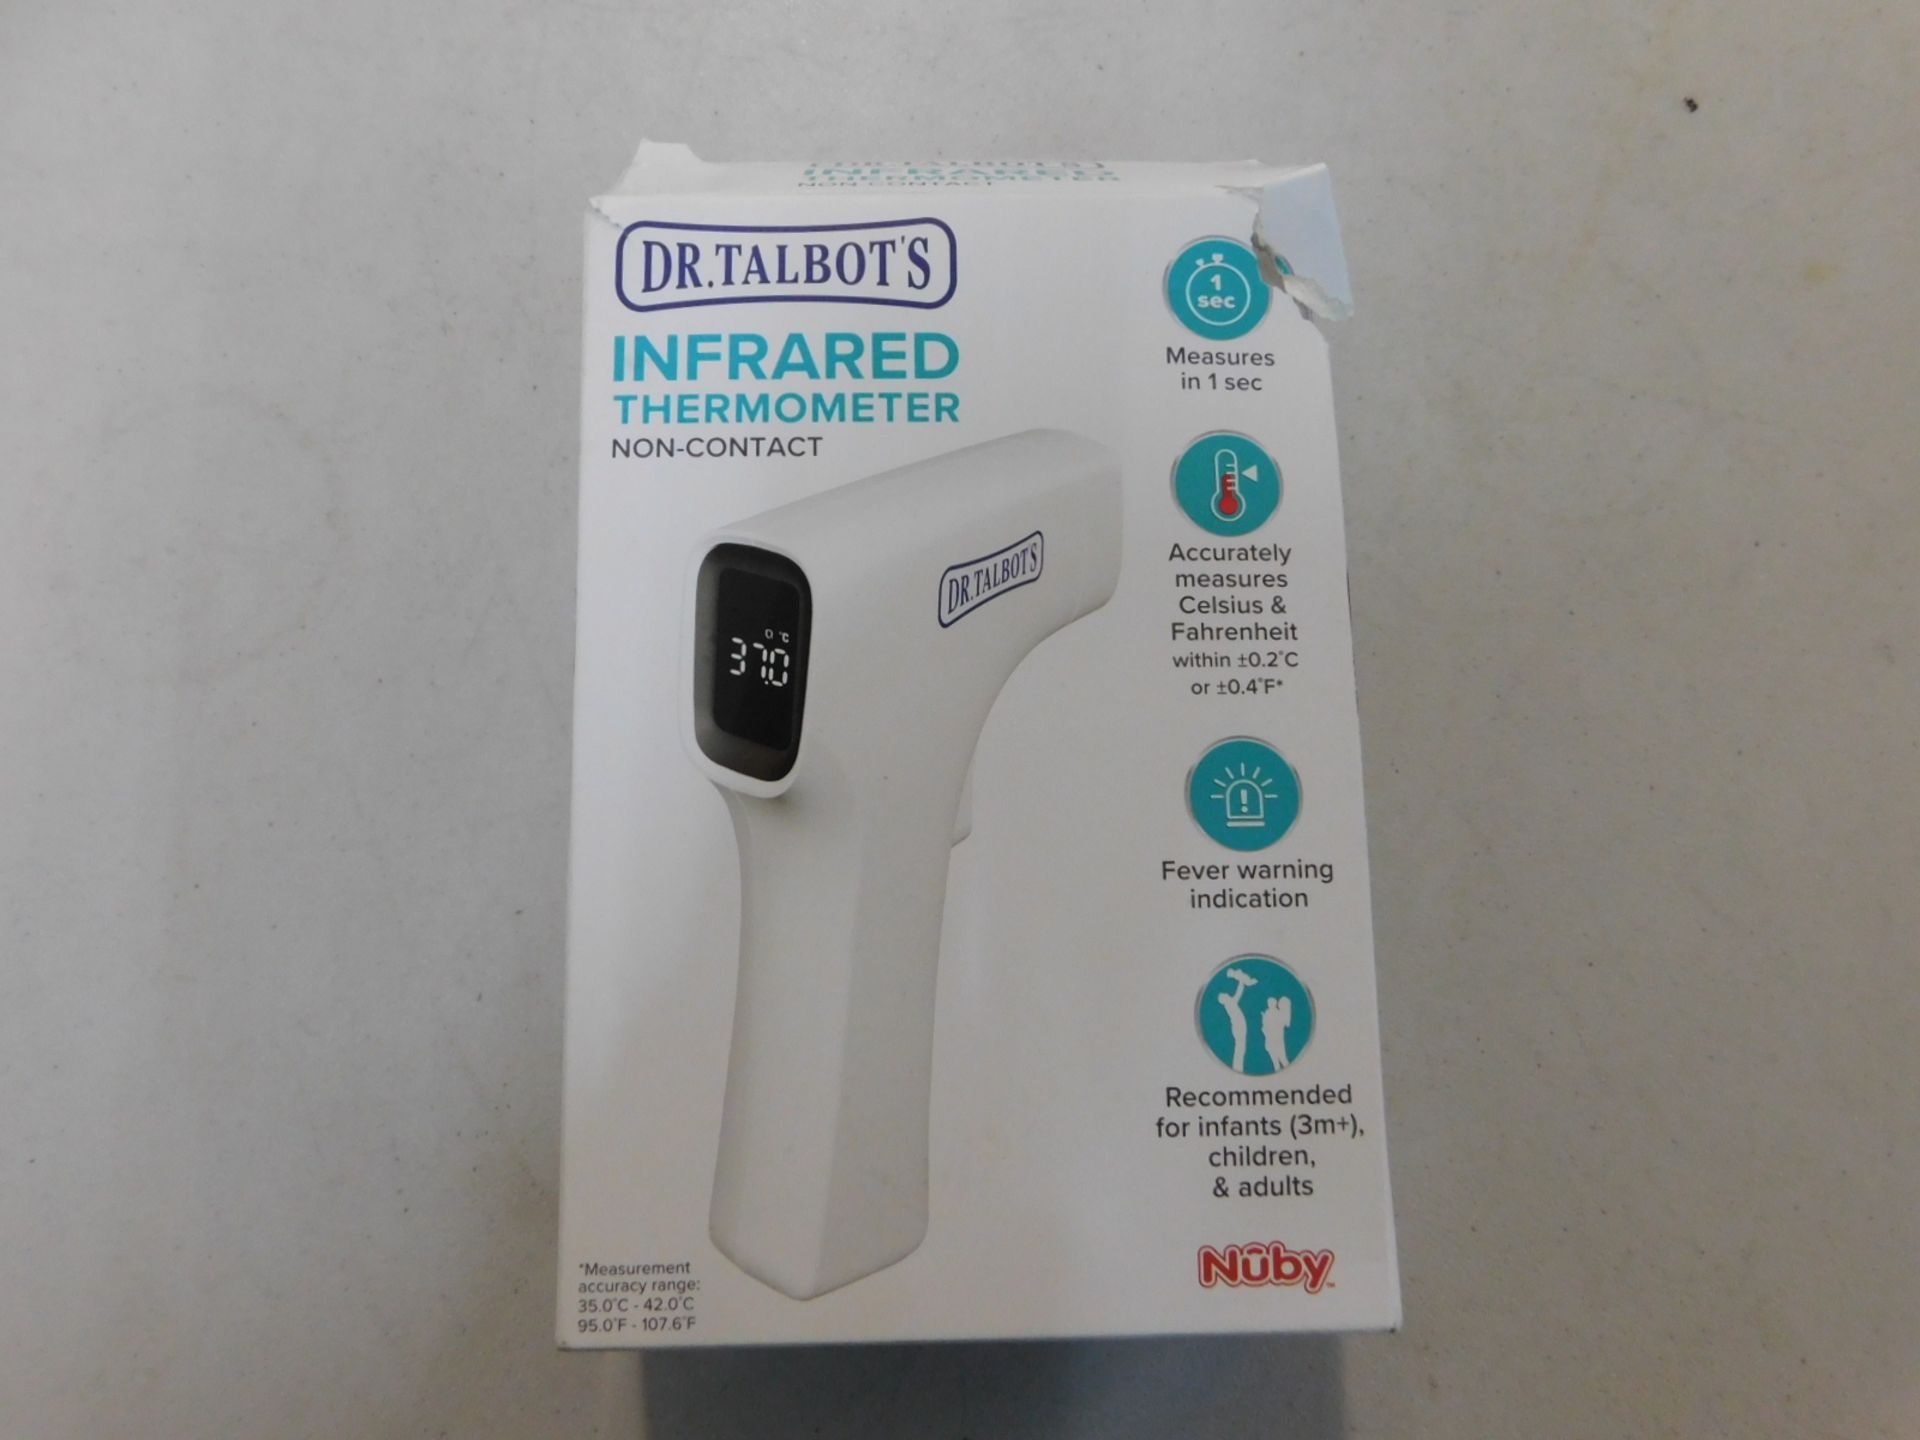 1 BOXED DR TALBOTS INFRARED THERMOMETER NON-CONTACT RRP Ã‚Â£79.99